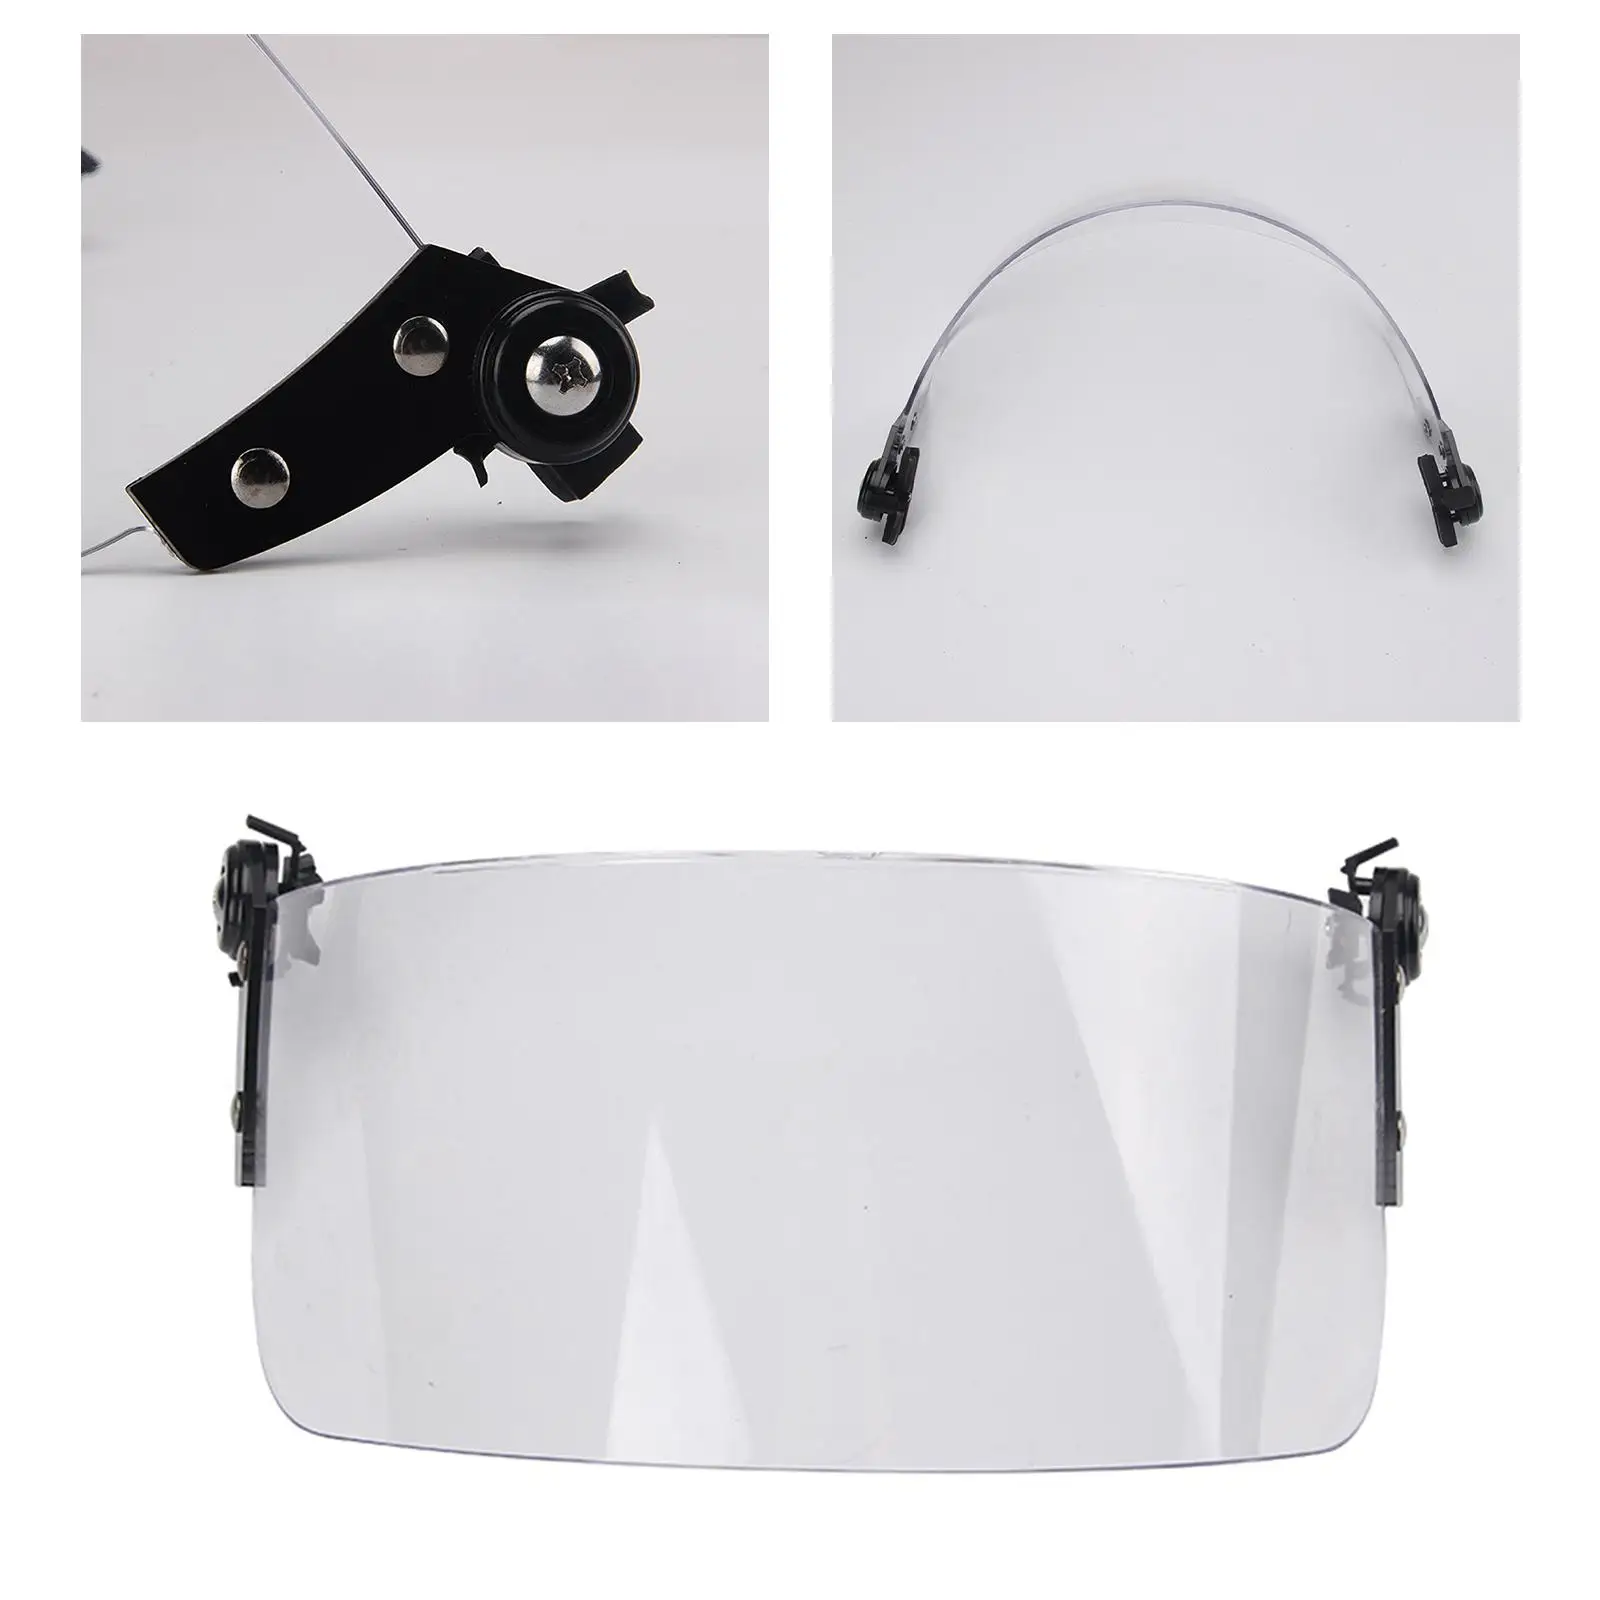 Motorcycle Wind Shield Lens Clear Shield Universal Windshield Replacement for Snowmobile Adult